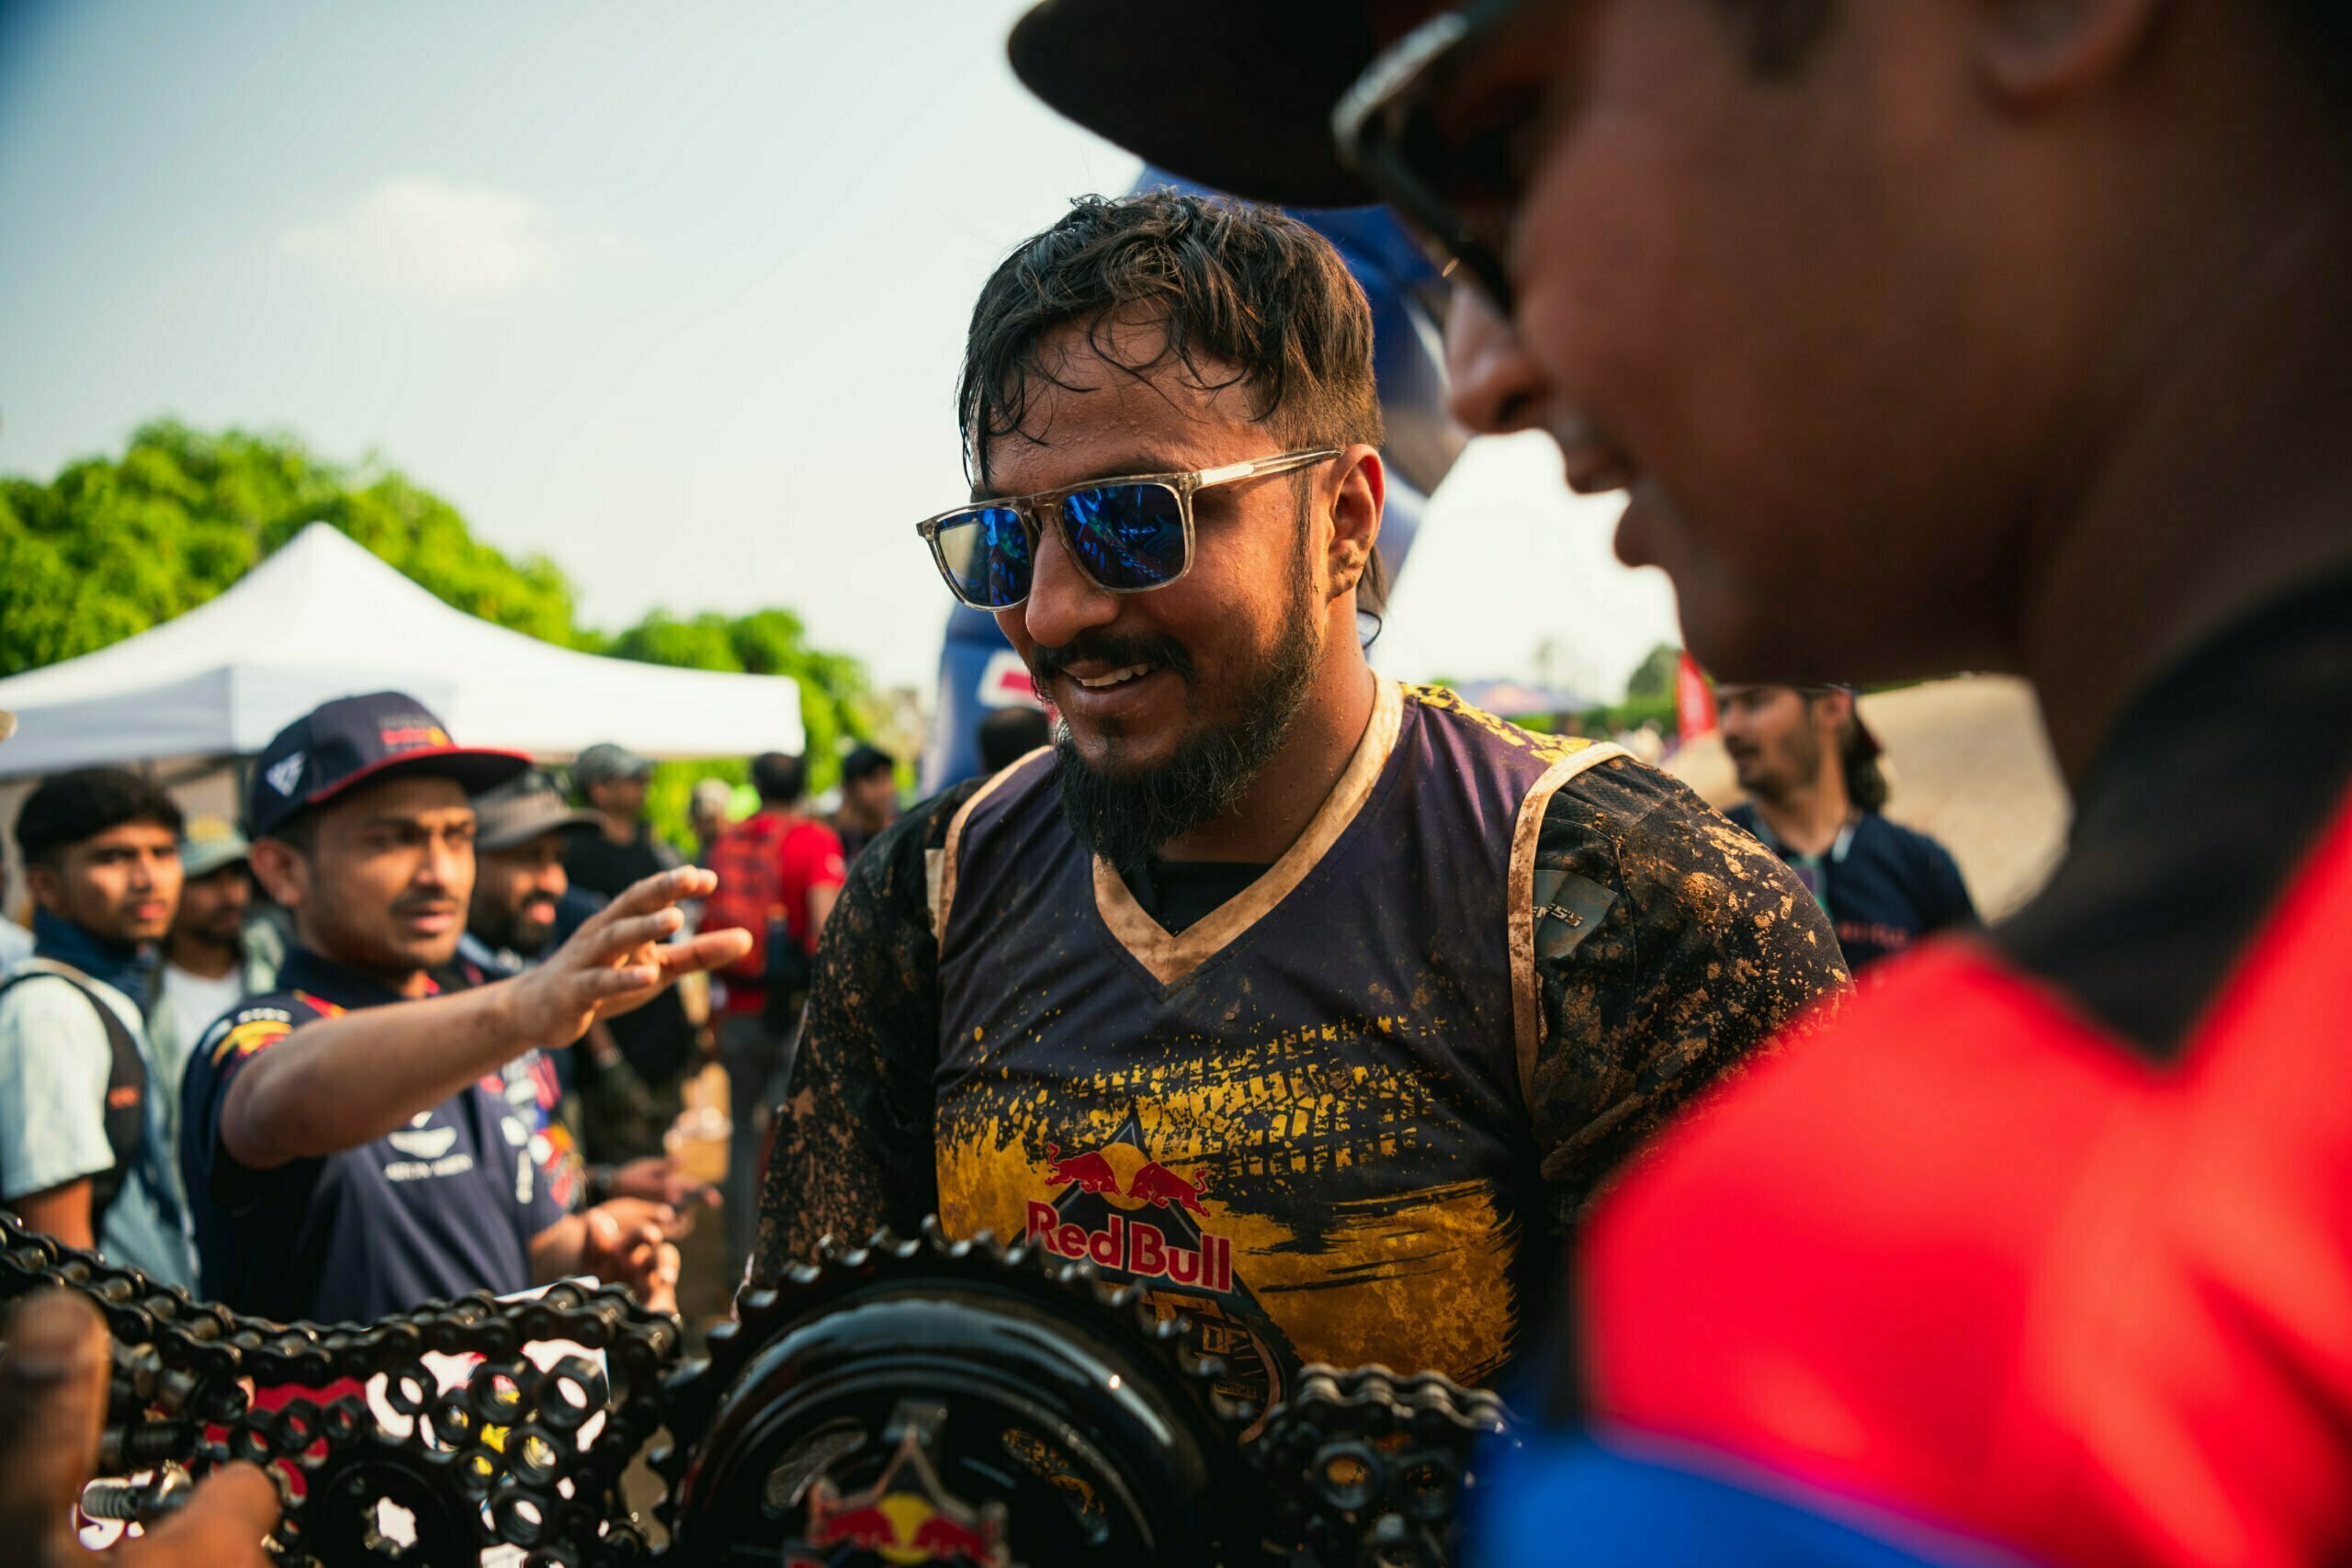 Shardul ‘Shas’ Sharma First Indian To Enter Red Bull Romaniac - Most Difficult Enduro Rally (3)